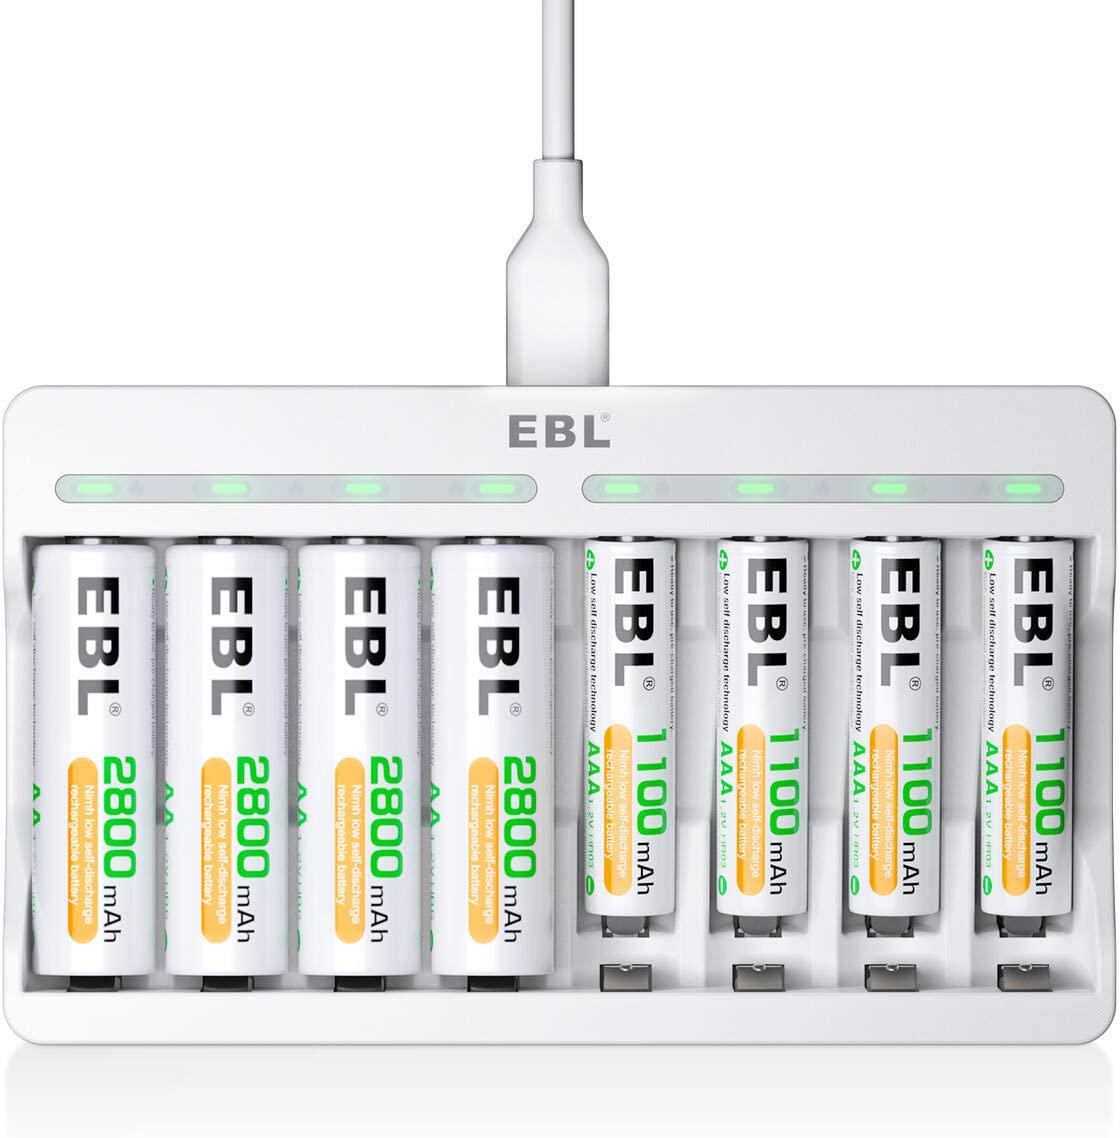 EBL, EBL 8 Slots AA AAA Battery Charger and 4 AA and 4 AAA Rechargeable Batteries - 5V 2A Fast Charging Battery Charger and Battery Sets